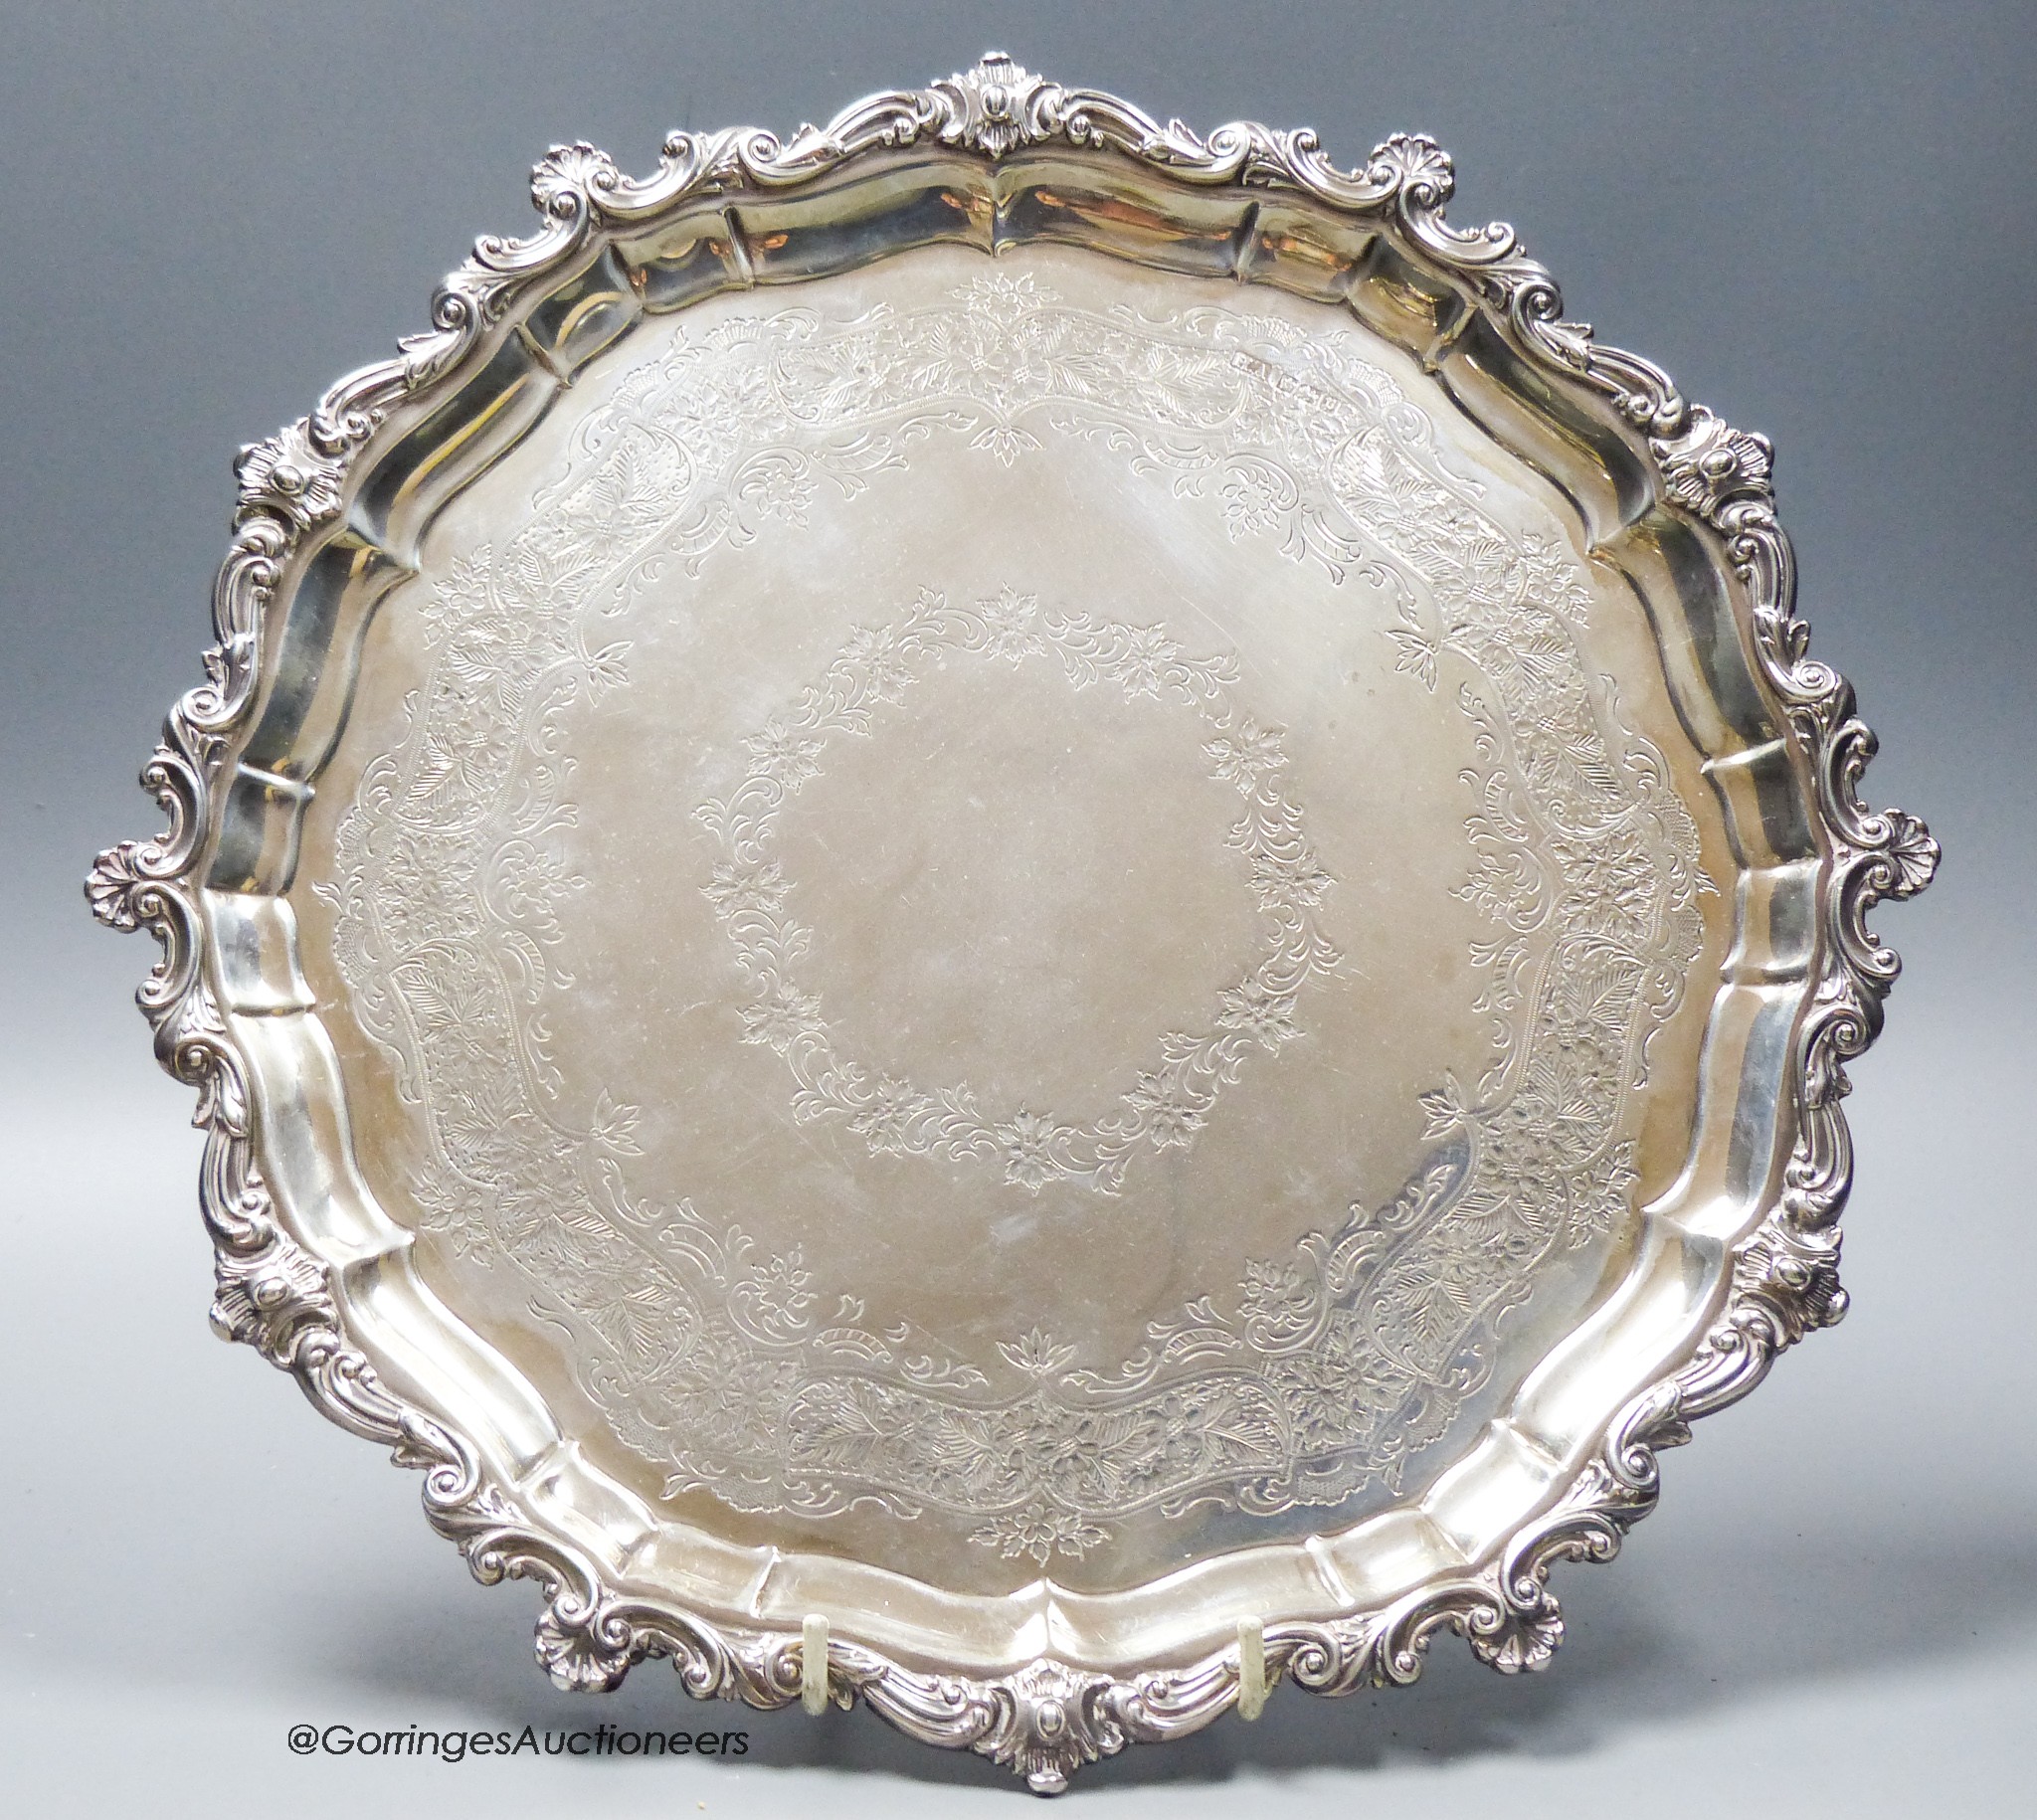 An Edwardian engraved shaped circular silver salver, with scroll border and later engraved inscription underneath, Atkin Brothers, Sheffield, 19907, 31.8cm, 23oz.